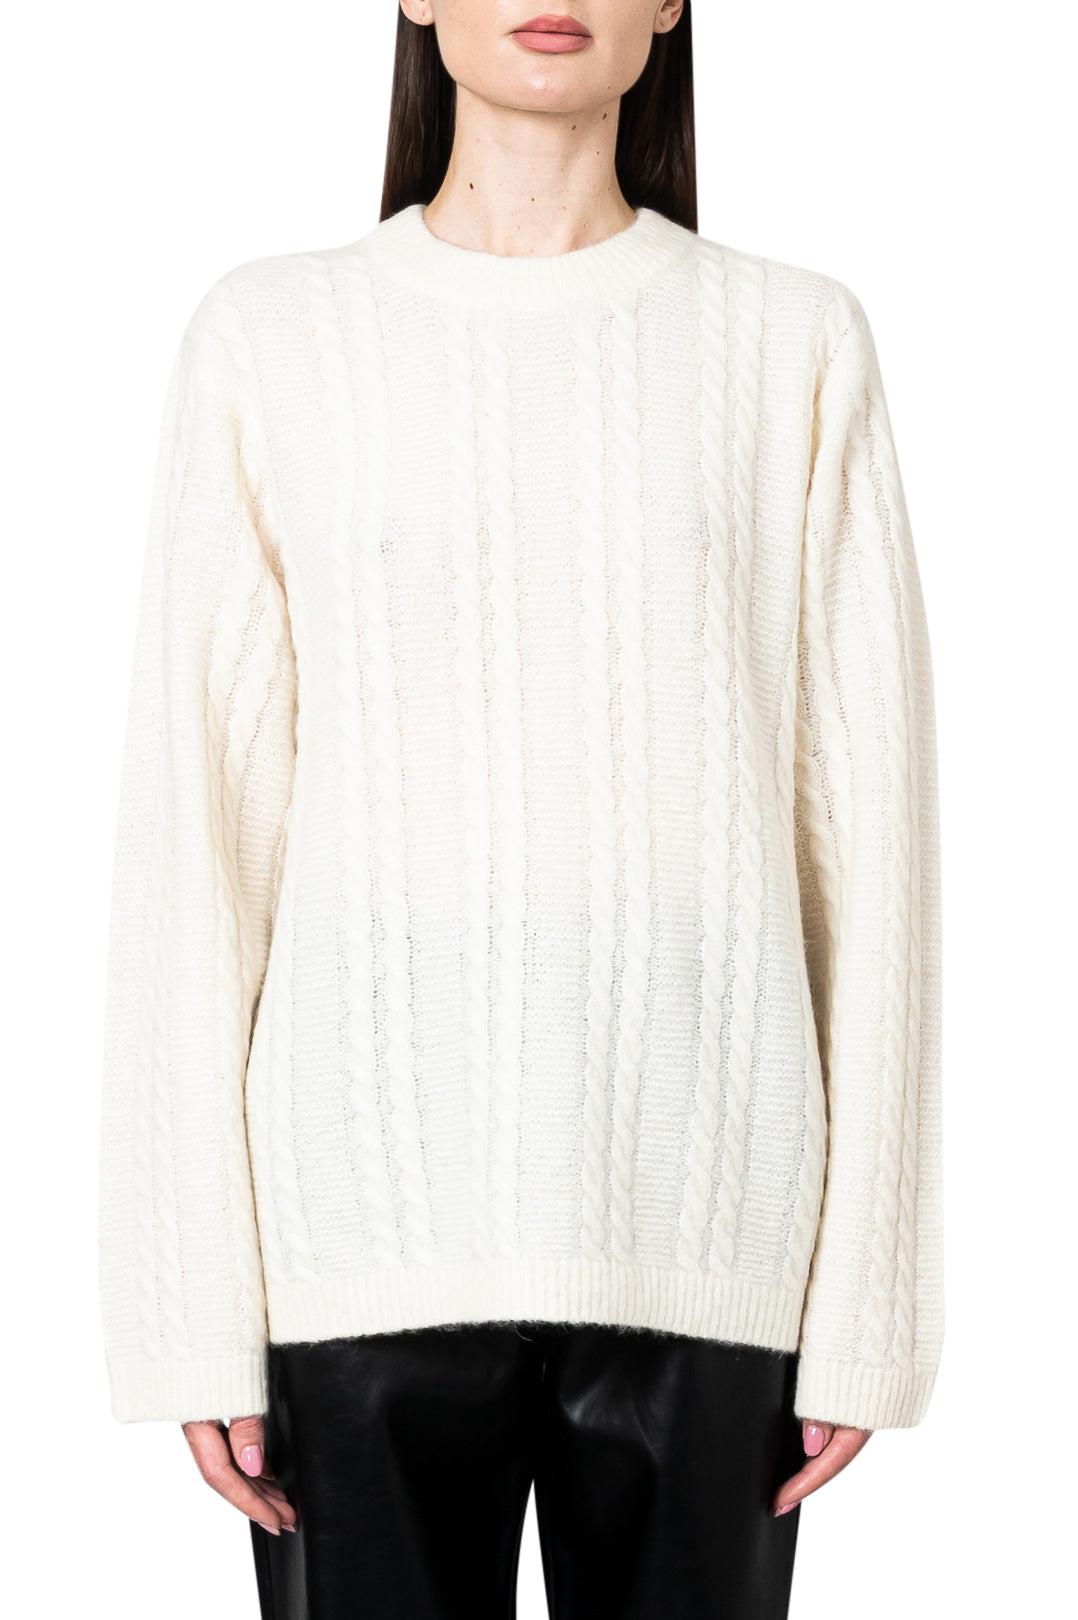 The Garment-Alpaca and wool cable sweater-18240-dgallerystore